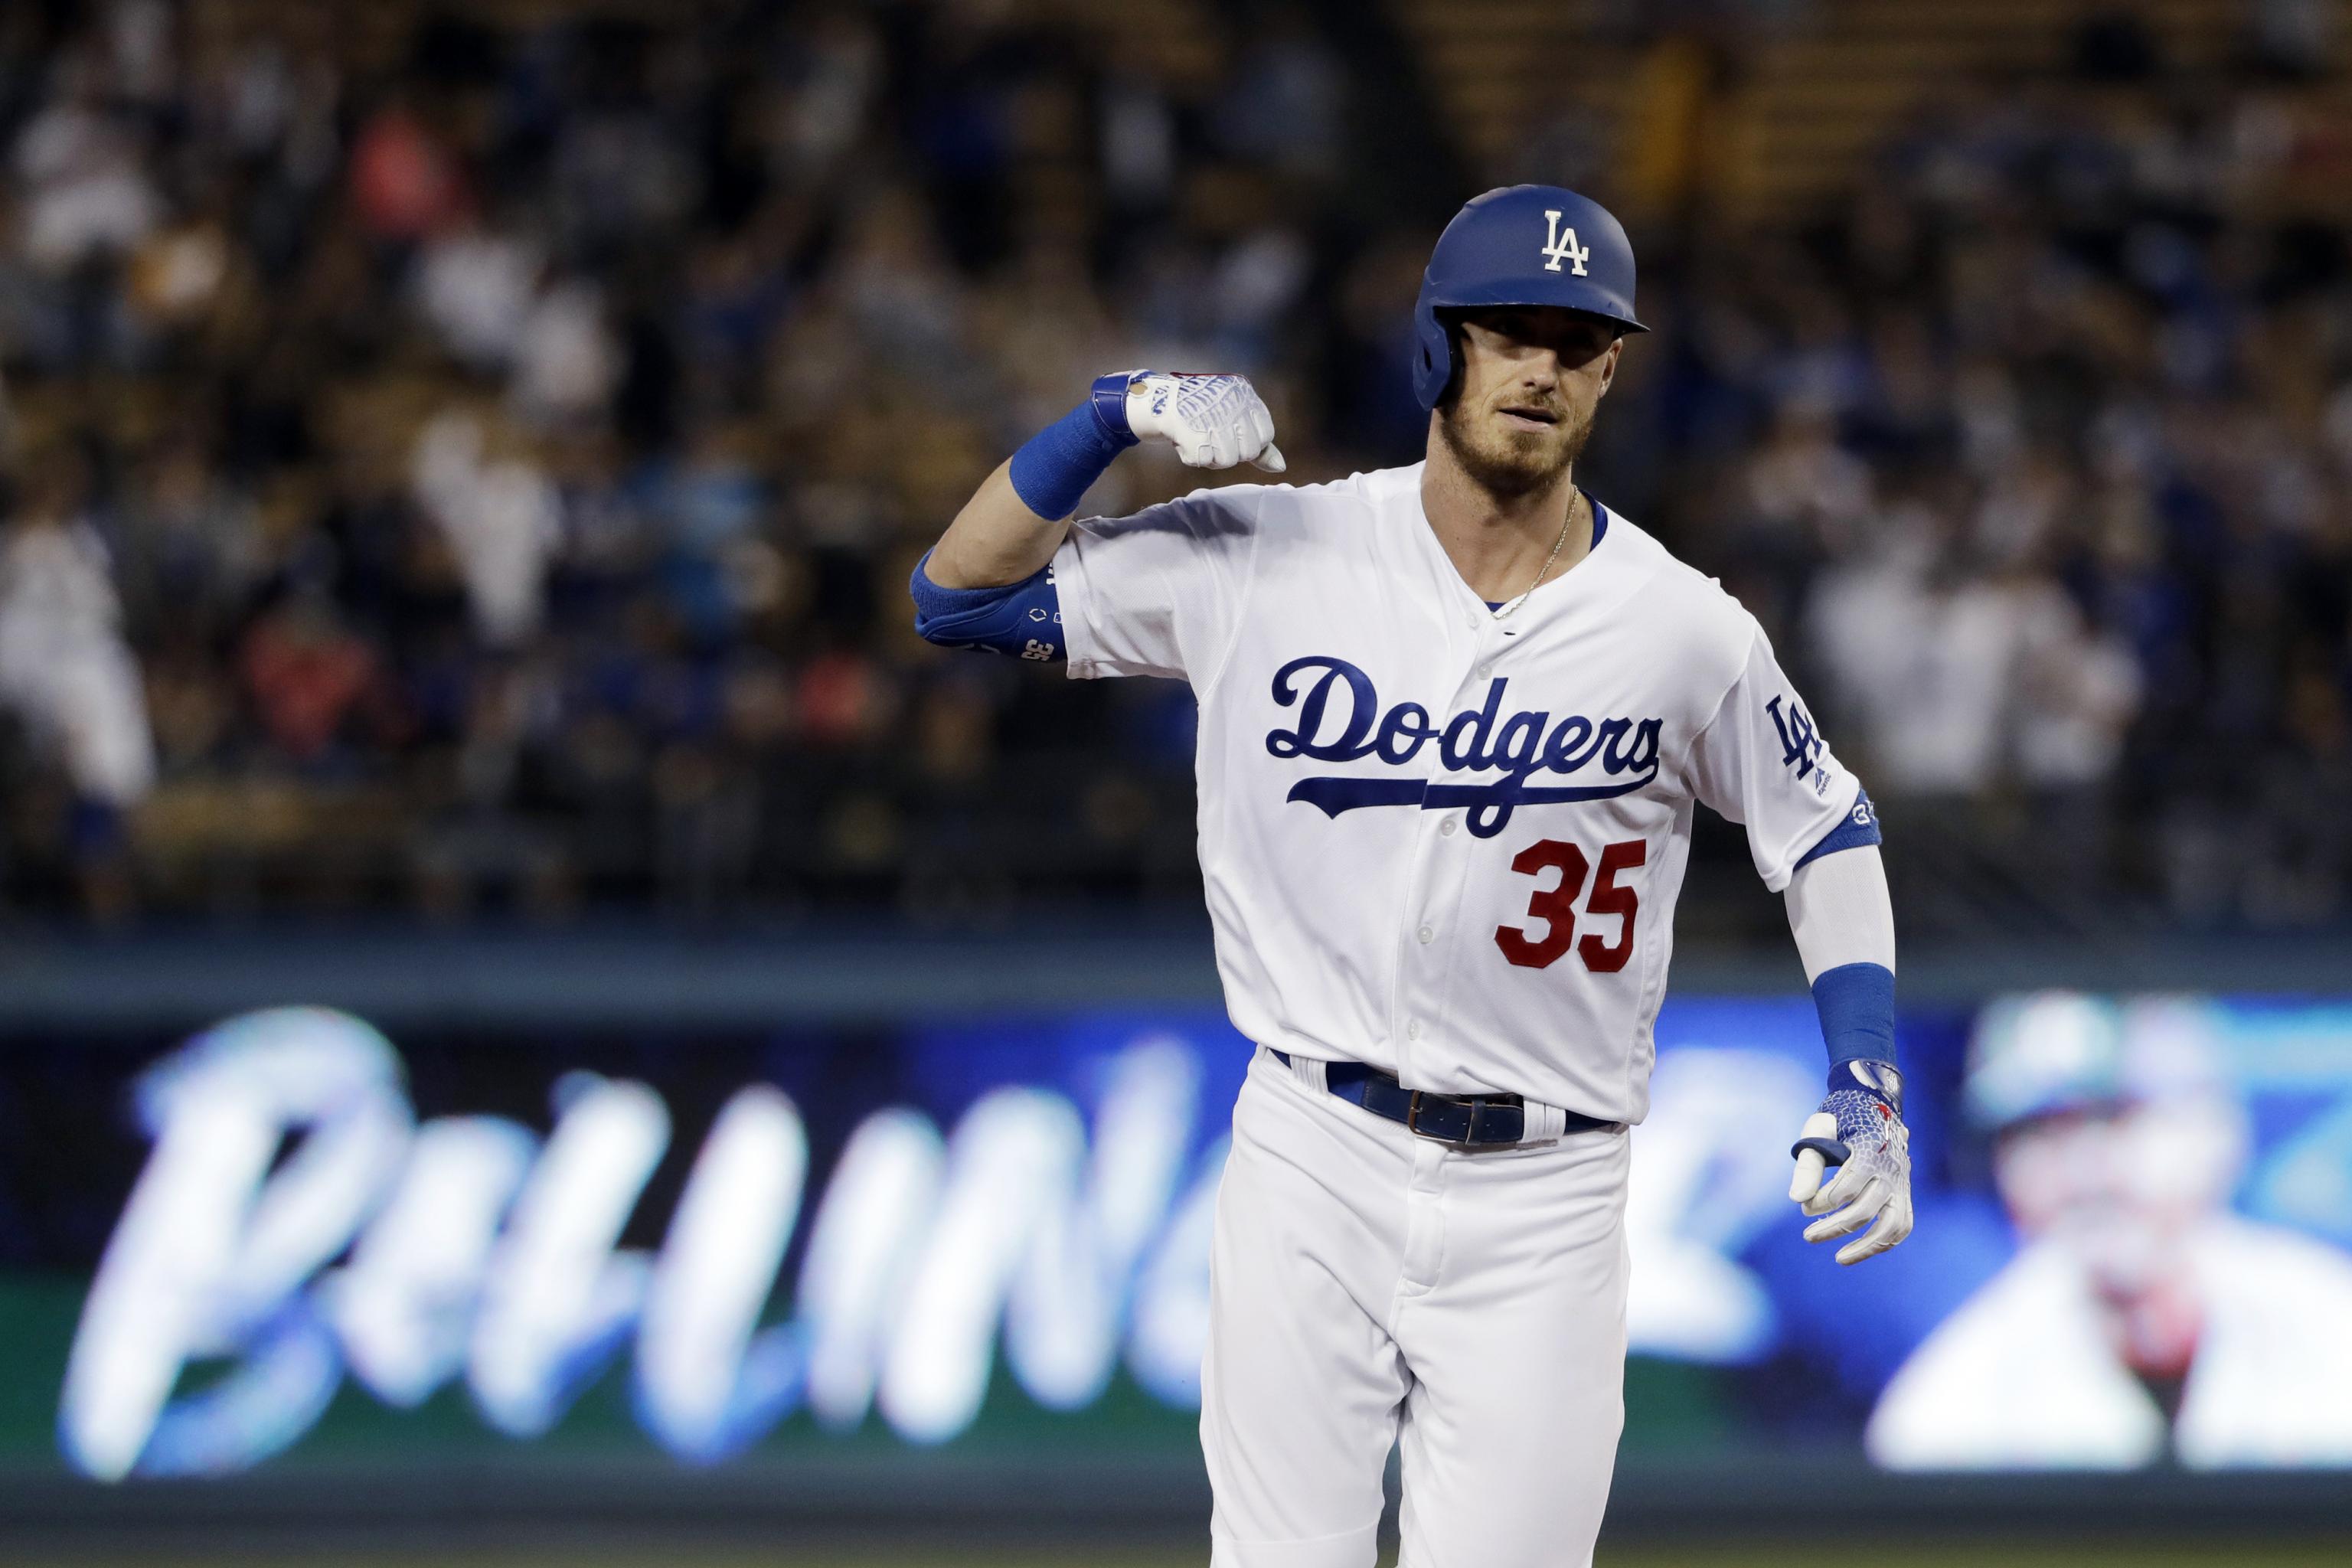 How is Cody Bellinger still batting .400 this late in the season